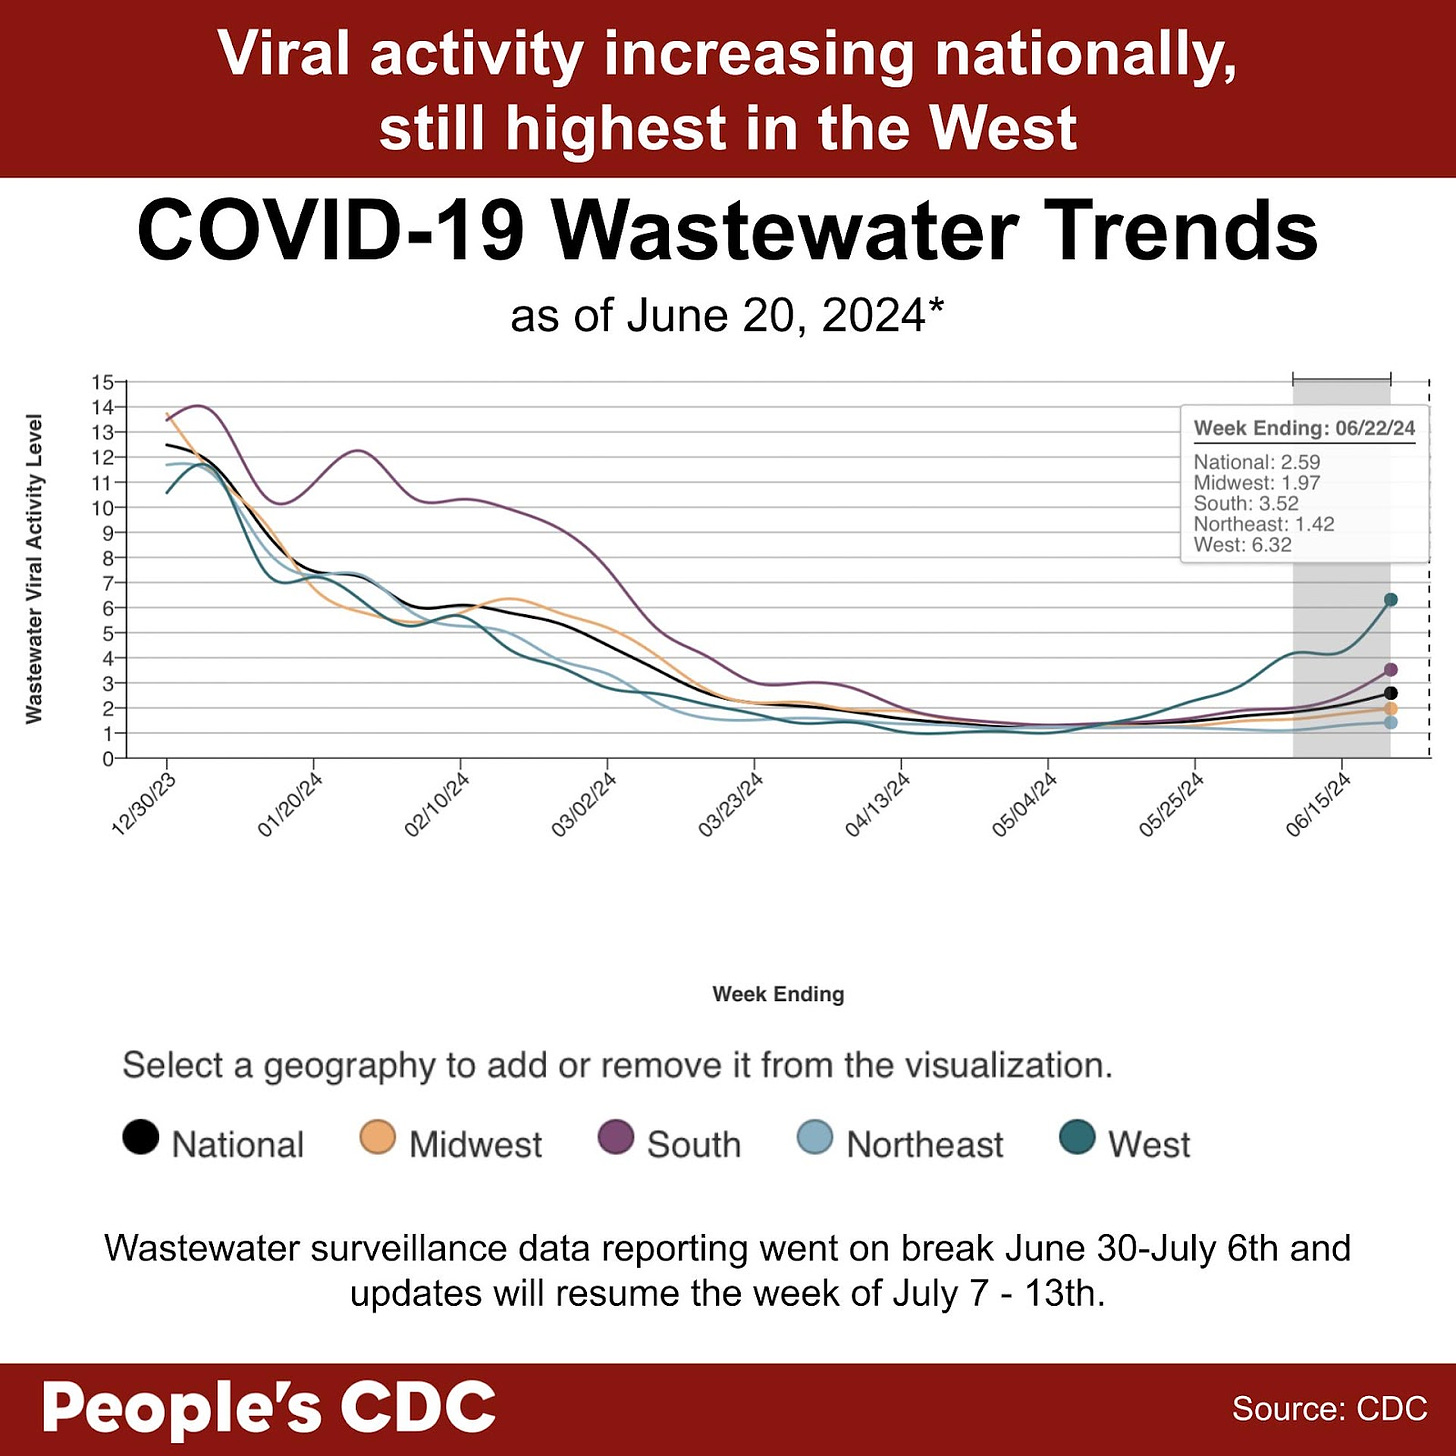 A line graph with the title, “COVID-19 Wastewater Trends as of June 20, 2024” with “Wastewater Viral Activity Level” indicated on the left-hand vertical axis, going from 0-15, and “Week Ending” across the horizontal axis, with date labels ranging from 12/23/23 to 6/06/24, with the graph extending through 6/15/24. A key at the bottom indicates line colors. National is black, Midwest is orange, South is purple, Northeast is light blue, and West is green. Overall, levels are trending upward in all regions, with the West showing the greatest increase. Within the gray-shaded provisional data provided for the last 2 weeks, wastewater levels in the West appear to be significantly rising, while there is an increase in all other areas. Text above the graph reads “Viral activity increasing nationally, still highest in the west. Text below reads “Wastewater surveillance data reporting went on break June 30-July 6th and updates will resume the week of July 7 - 13th. People’s CDC. Source: CDC.”